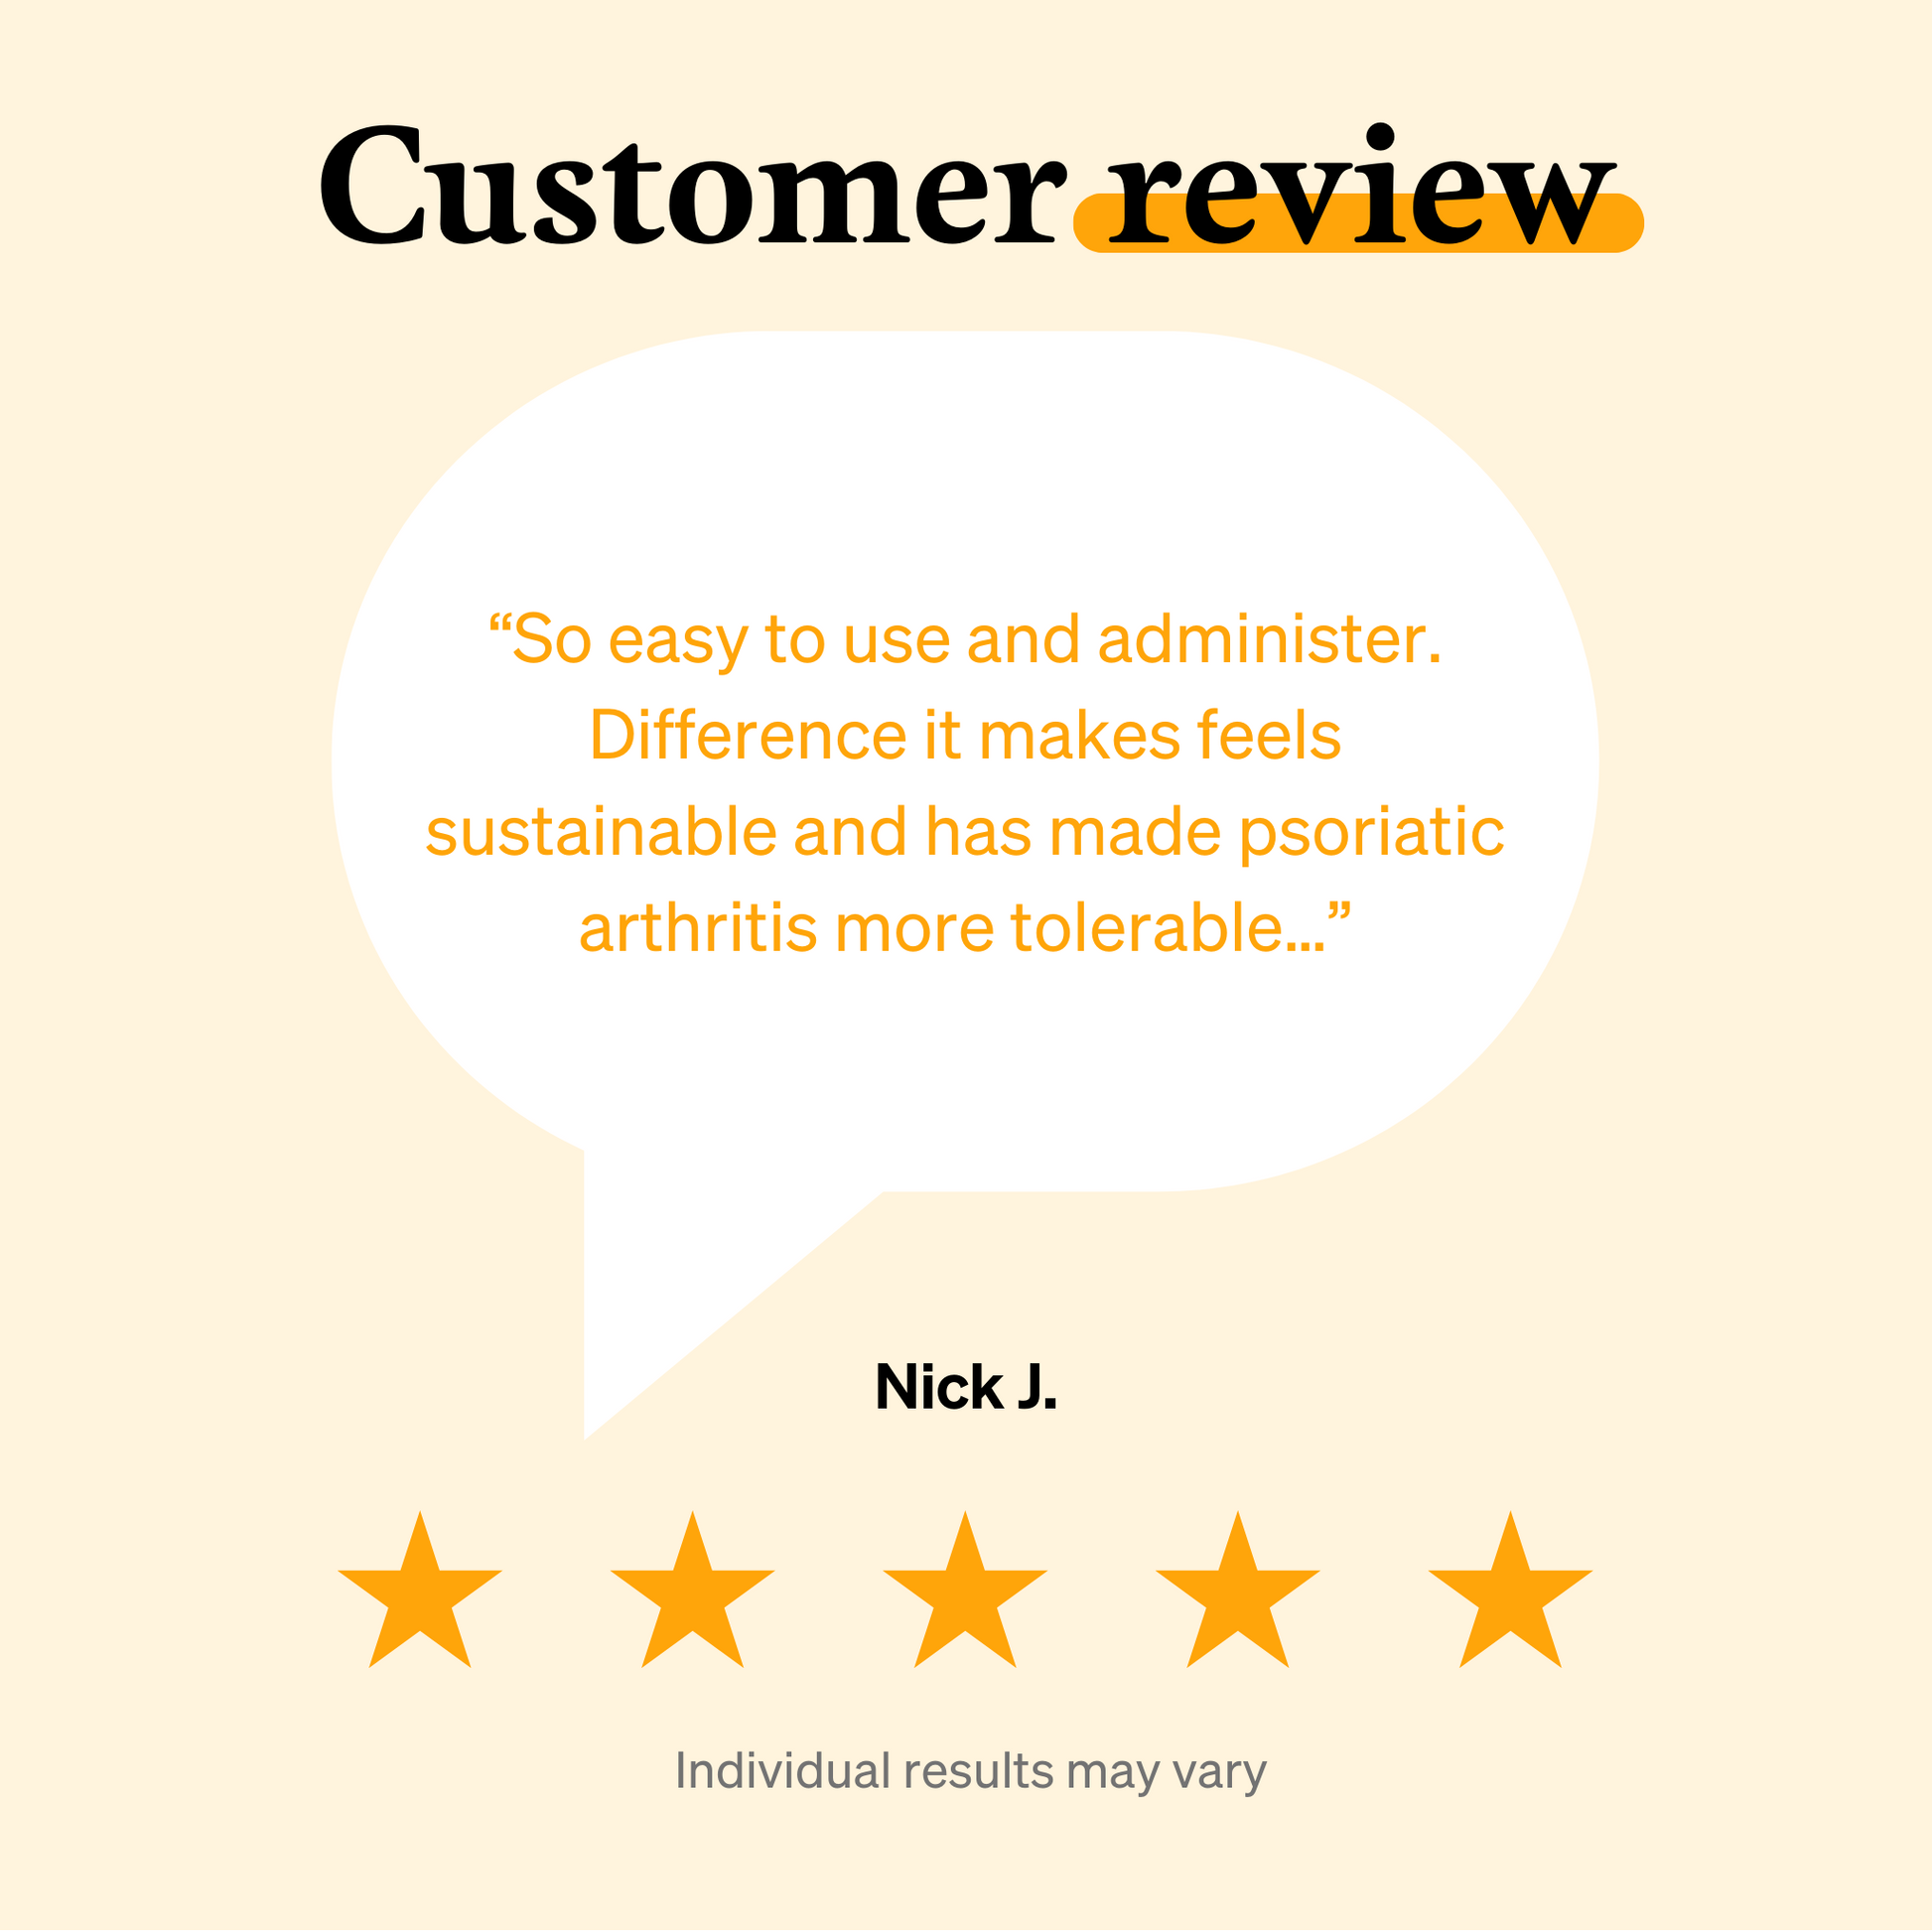 5 star customer review graphic for iüMove from iüLabs, joint health support supplement